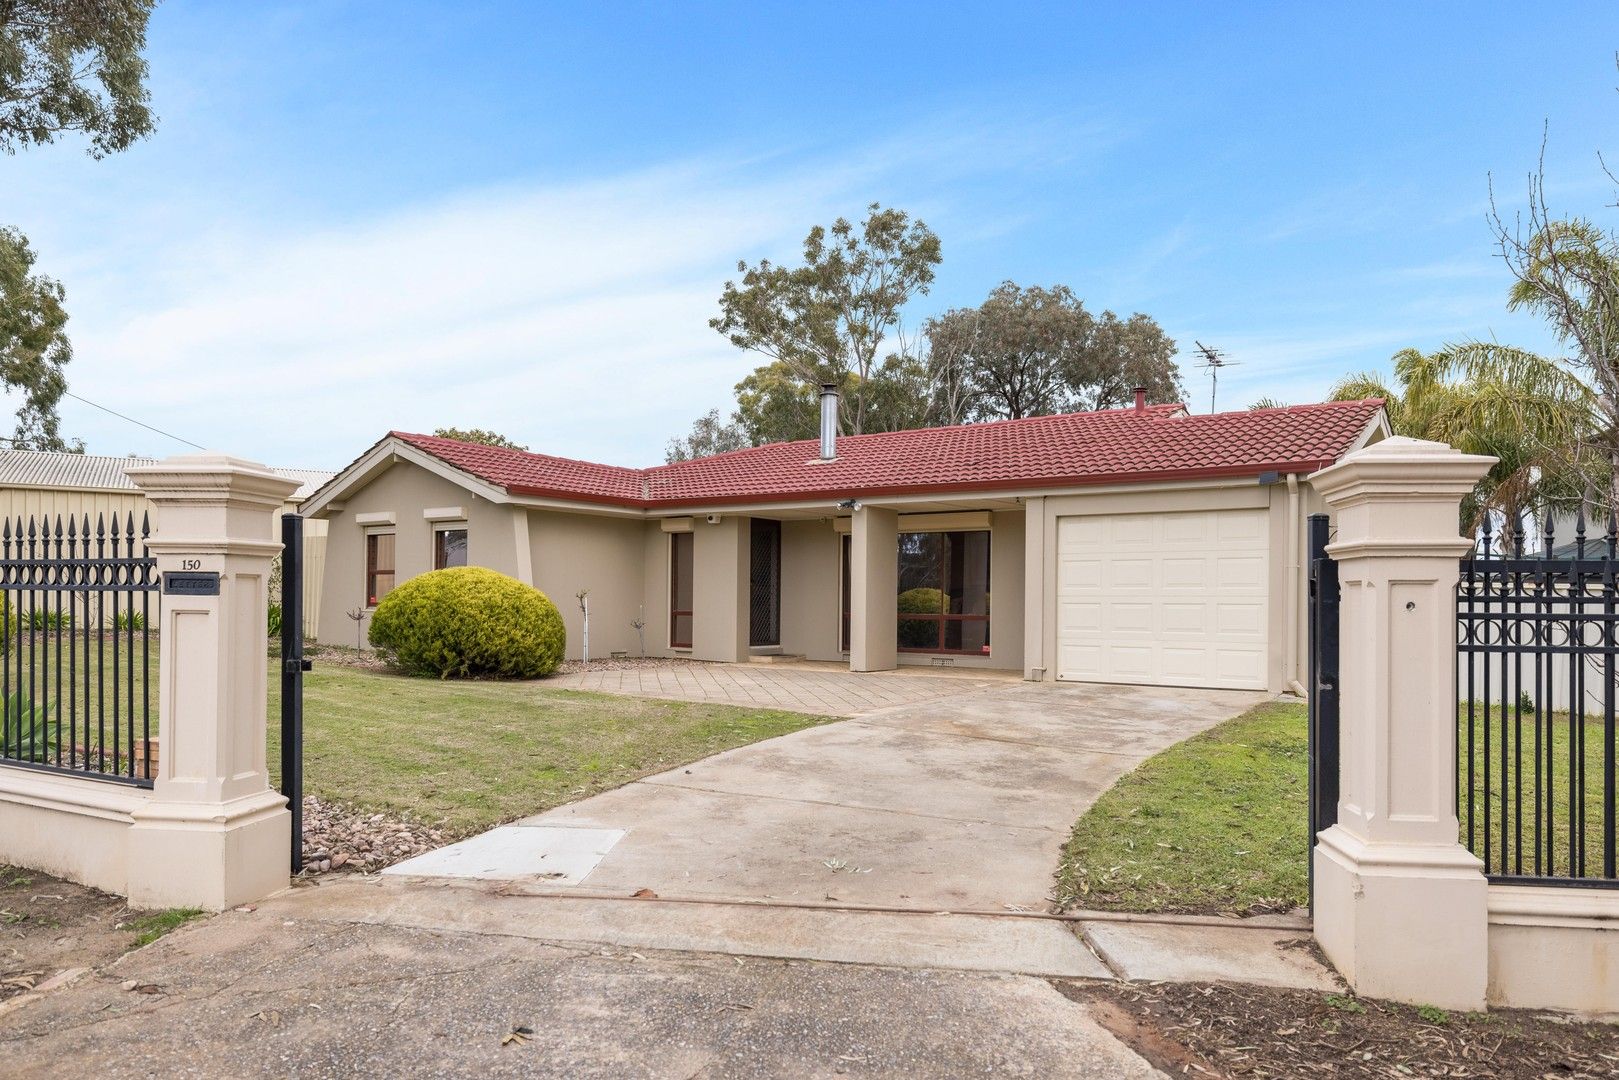 4 bedrooms House in 150 Black Road FLAGSTAFF HILL SA, 5159